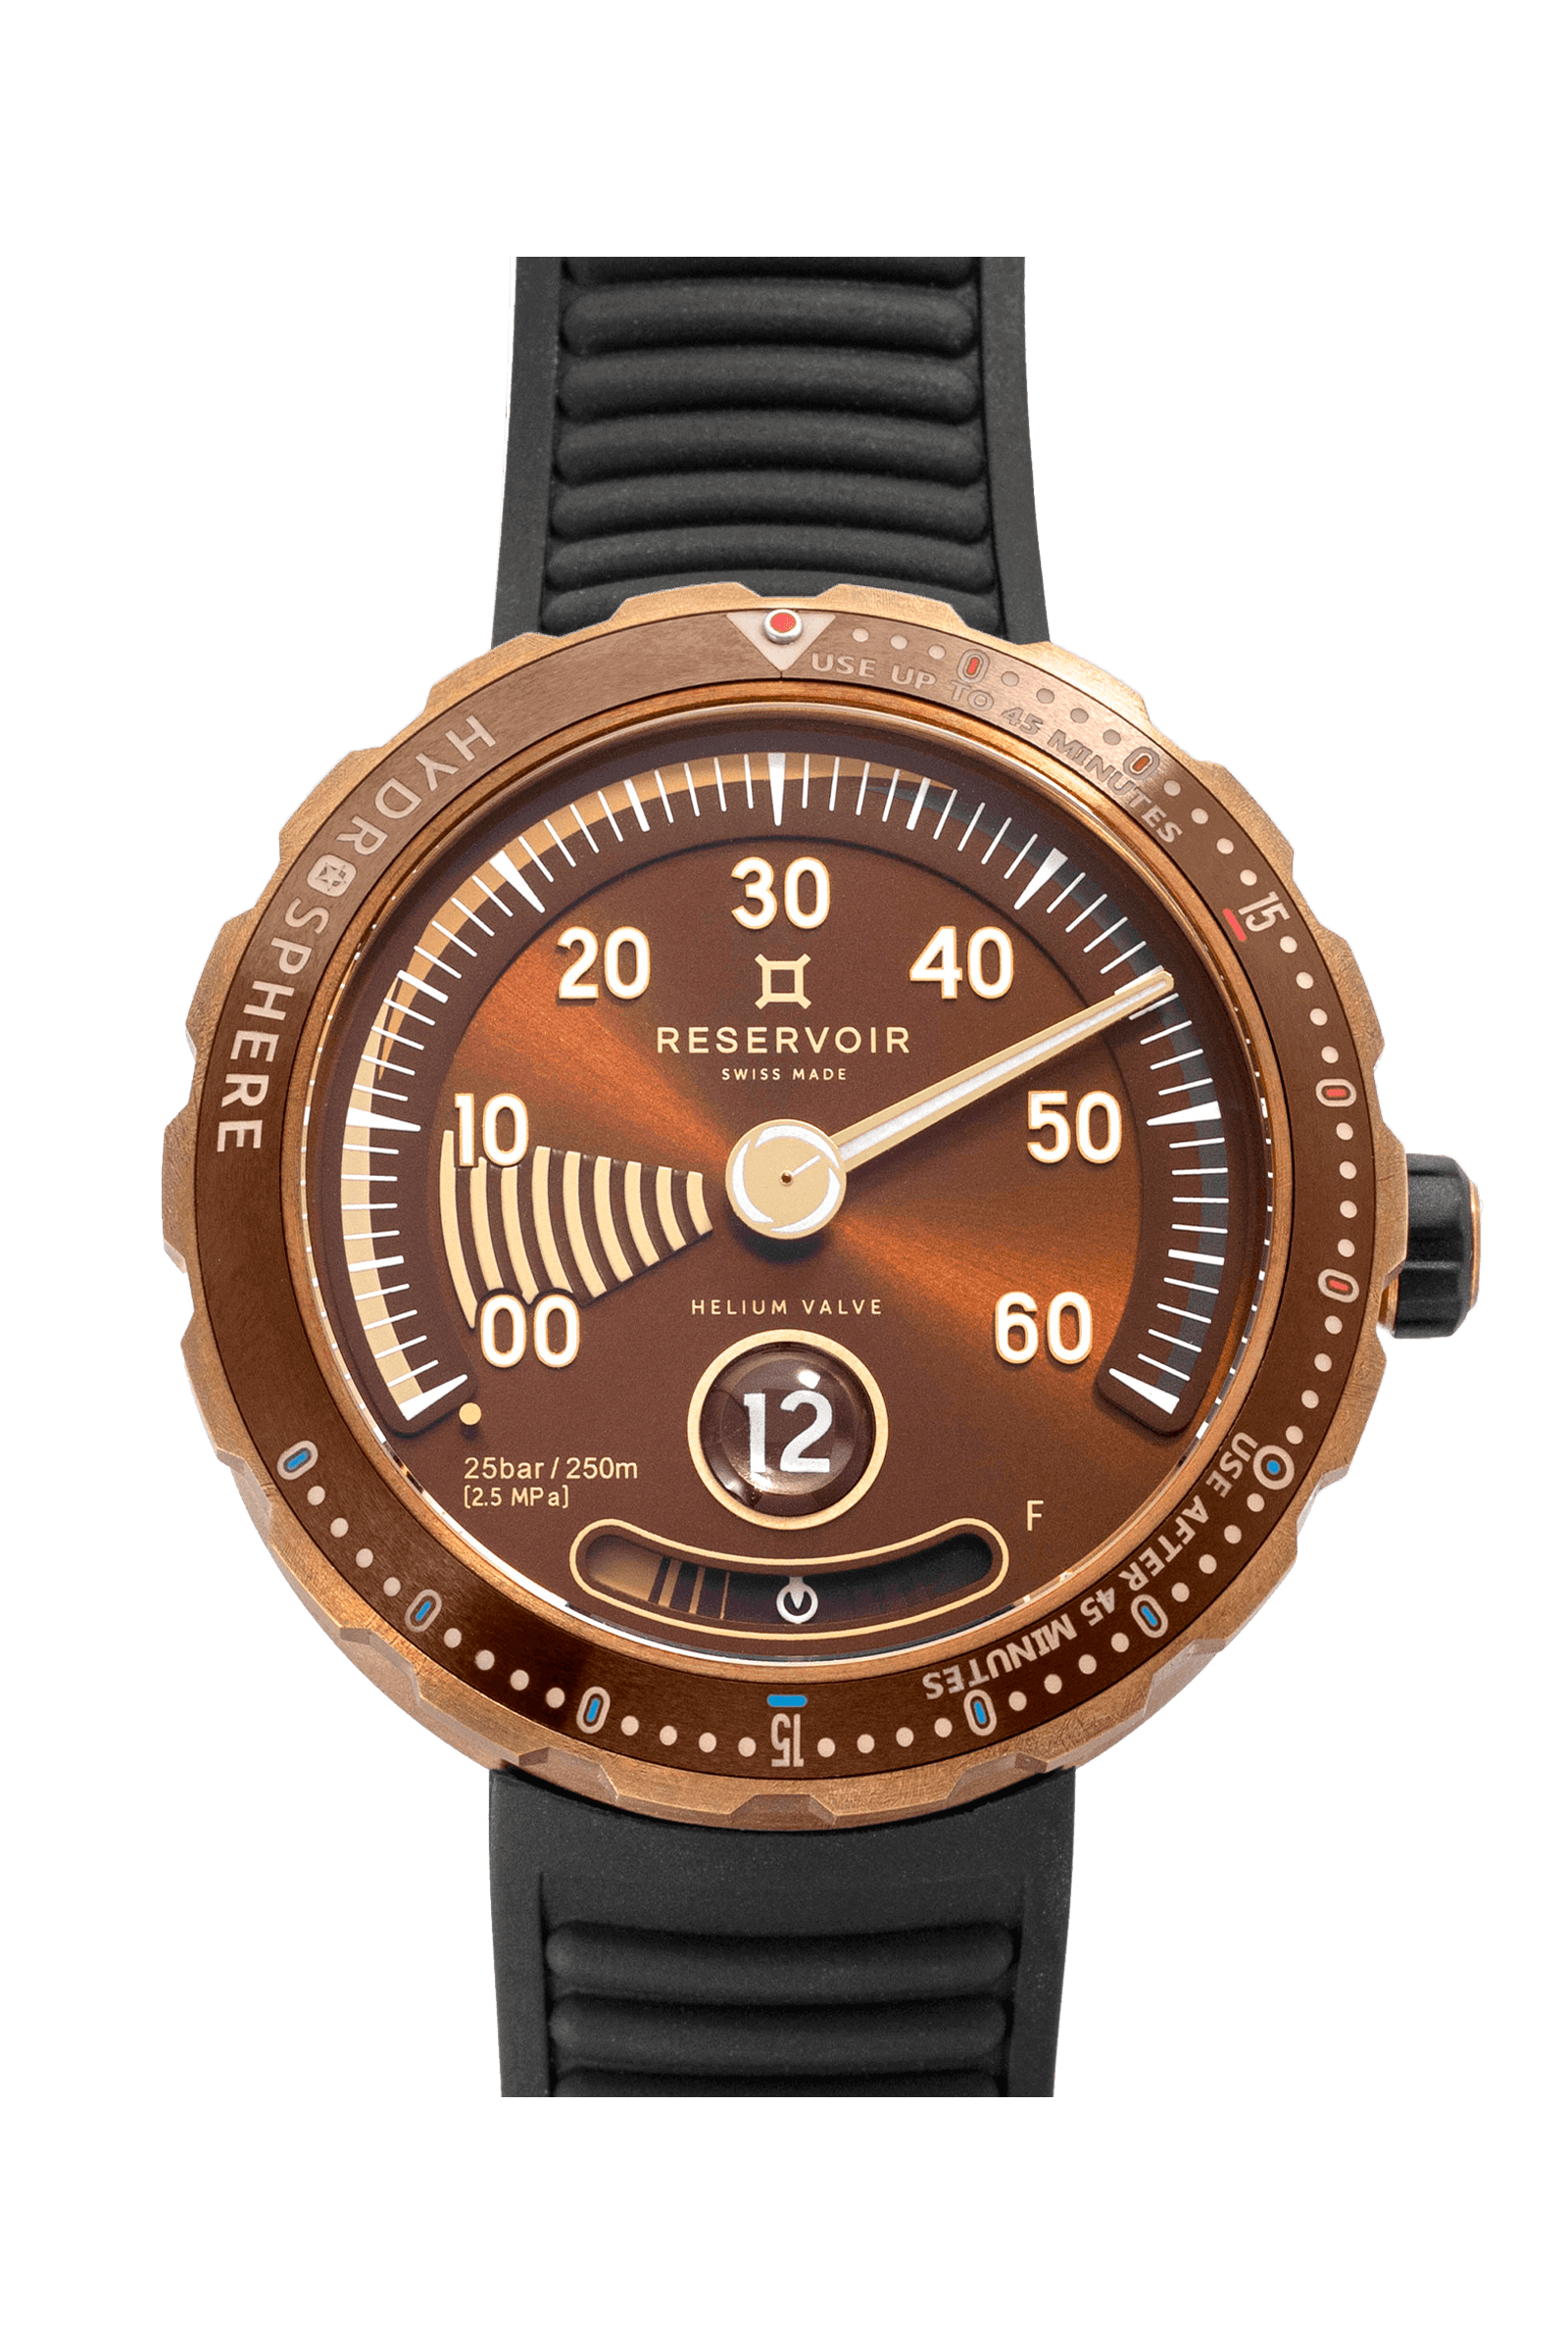 Luxury diver watch with dark brown, light peach and light blue manometer.